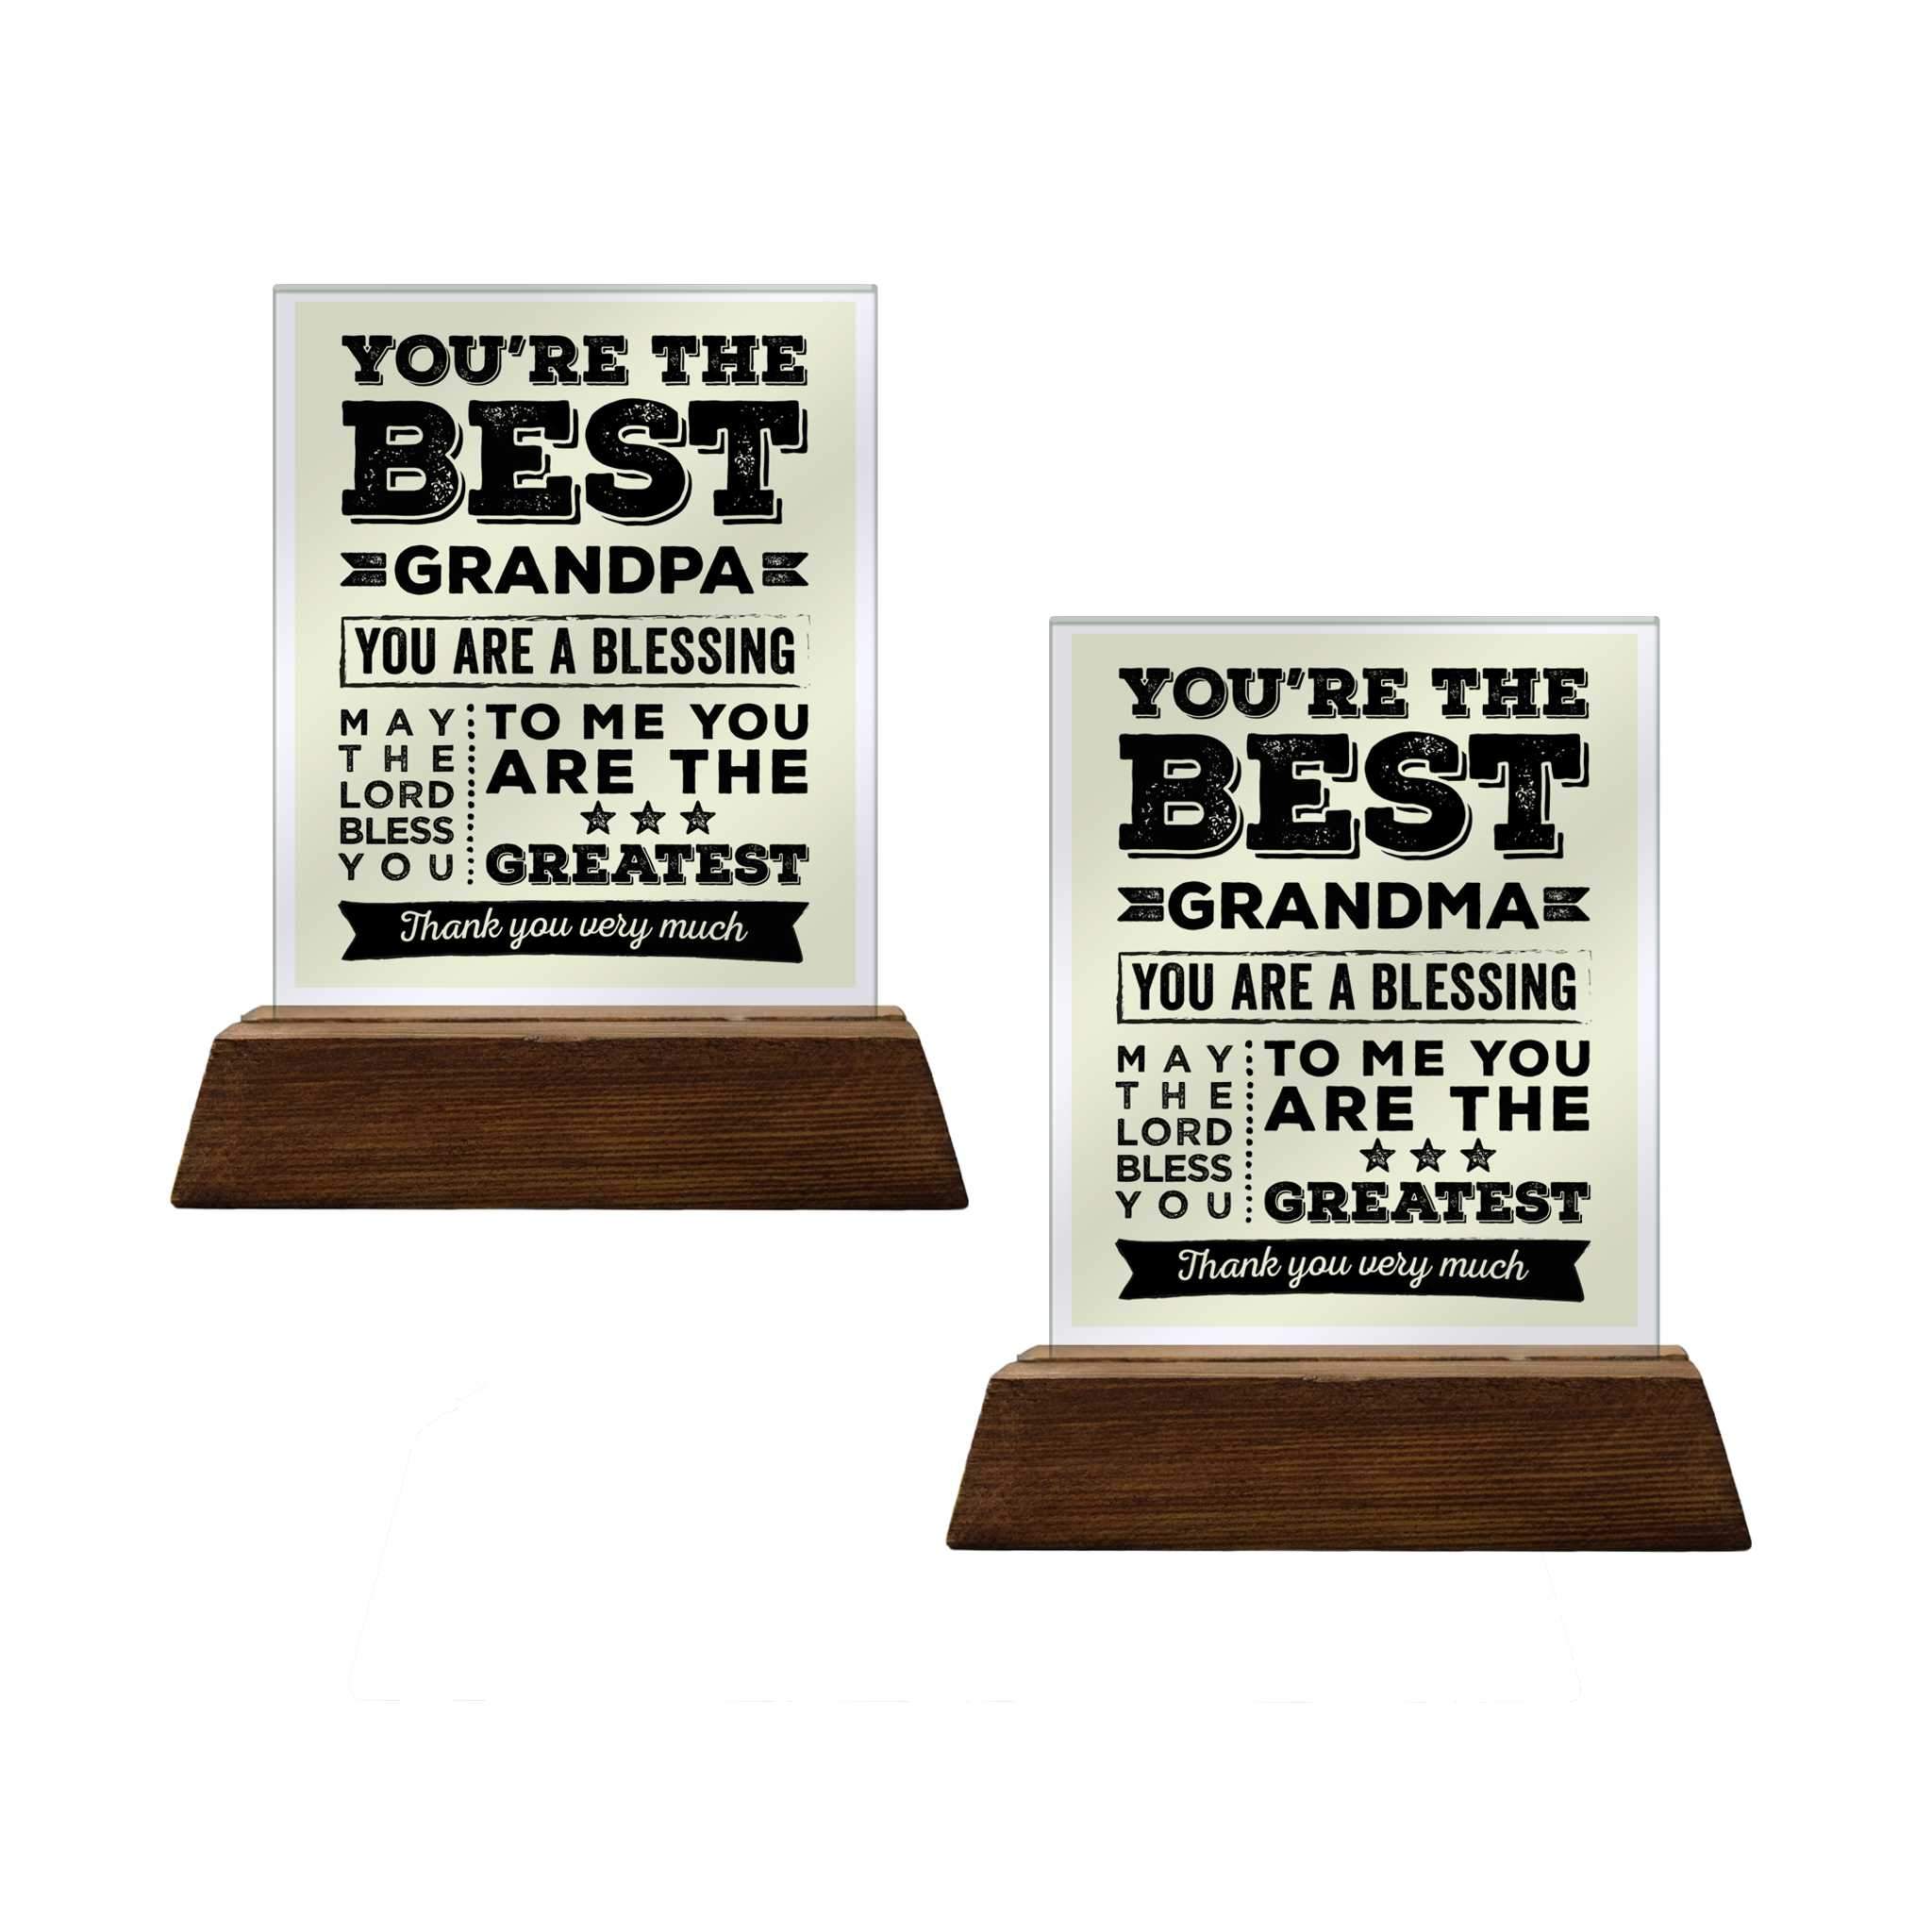 You're the Best Glass Plaque For Grandparents